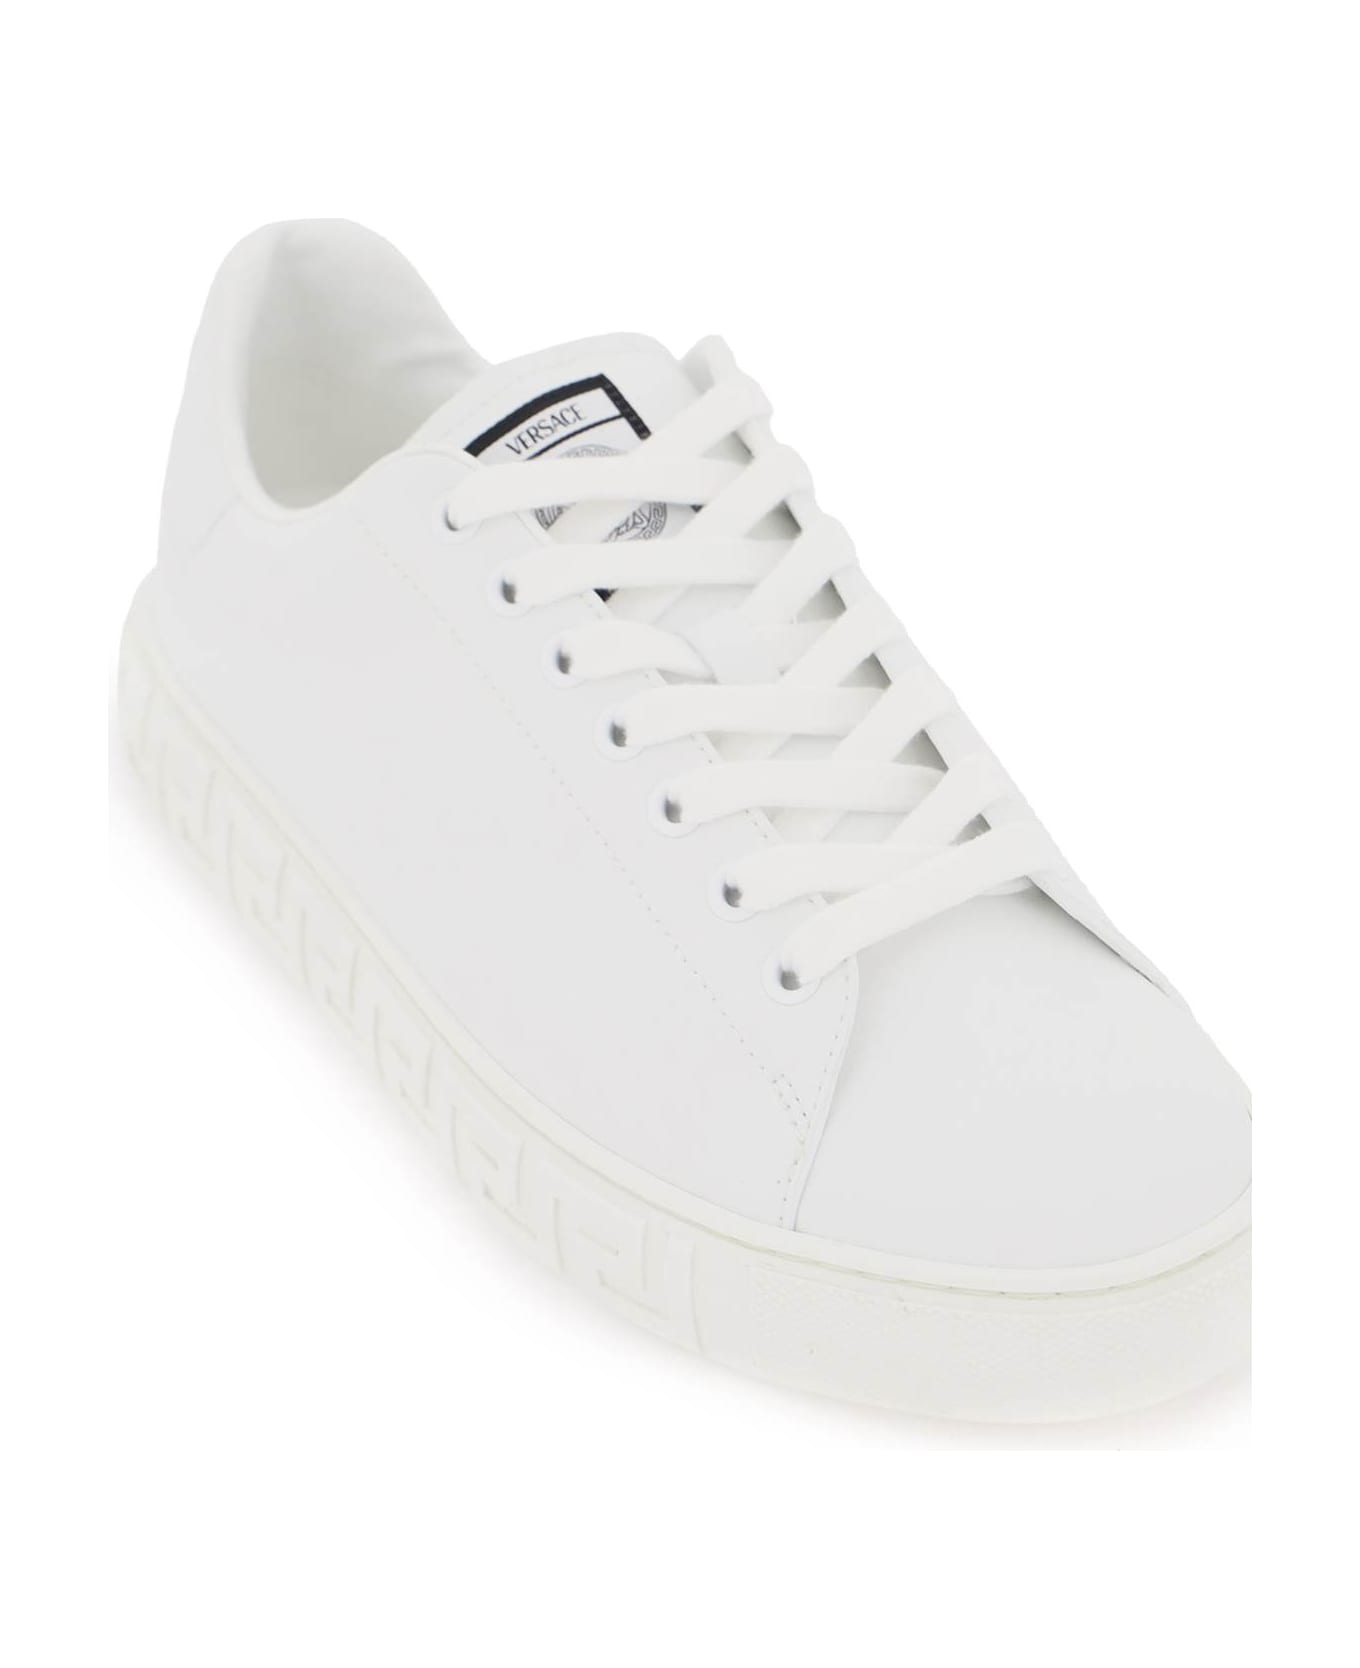 Versace White Leather Sneakers - White スニーカー